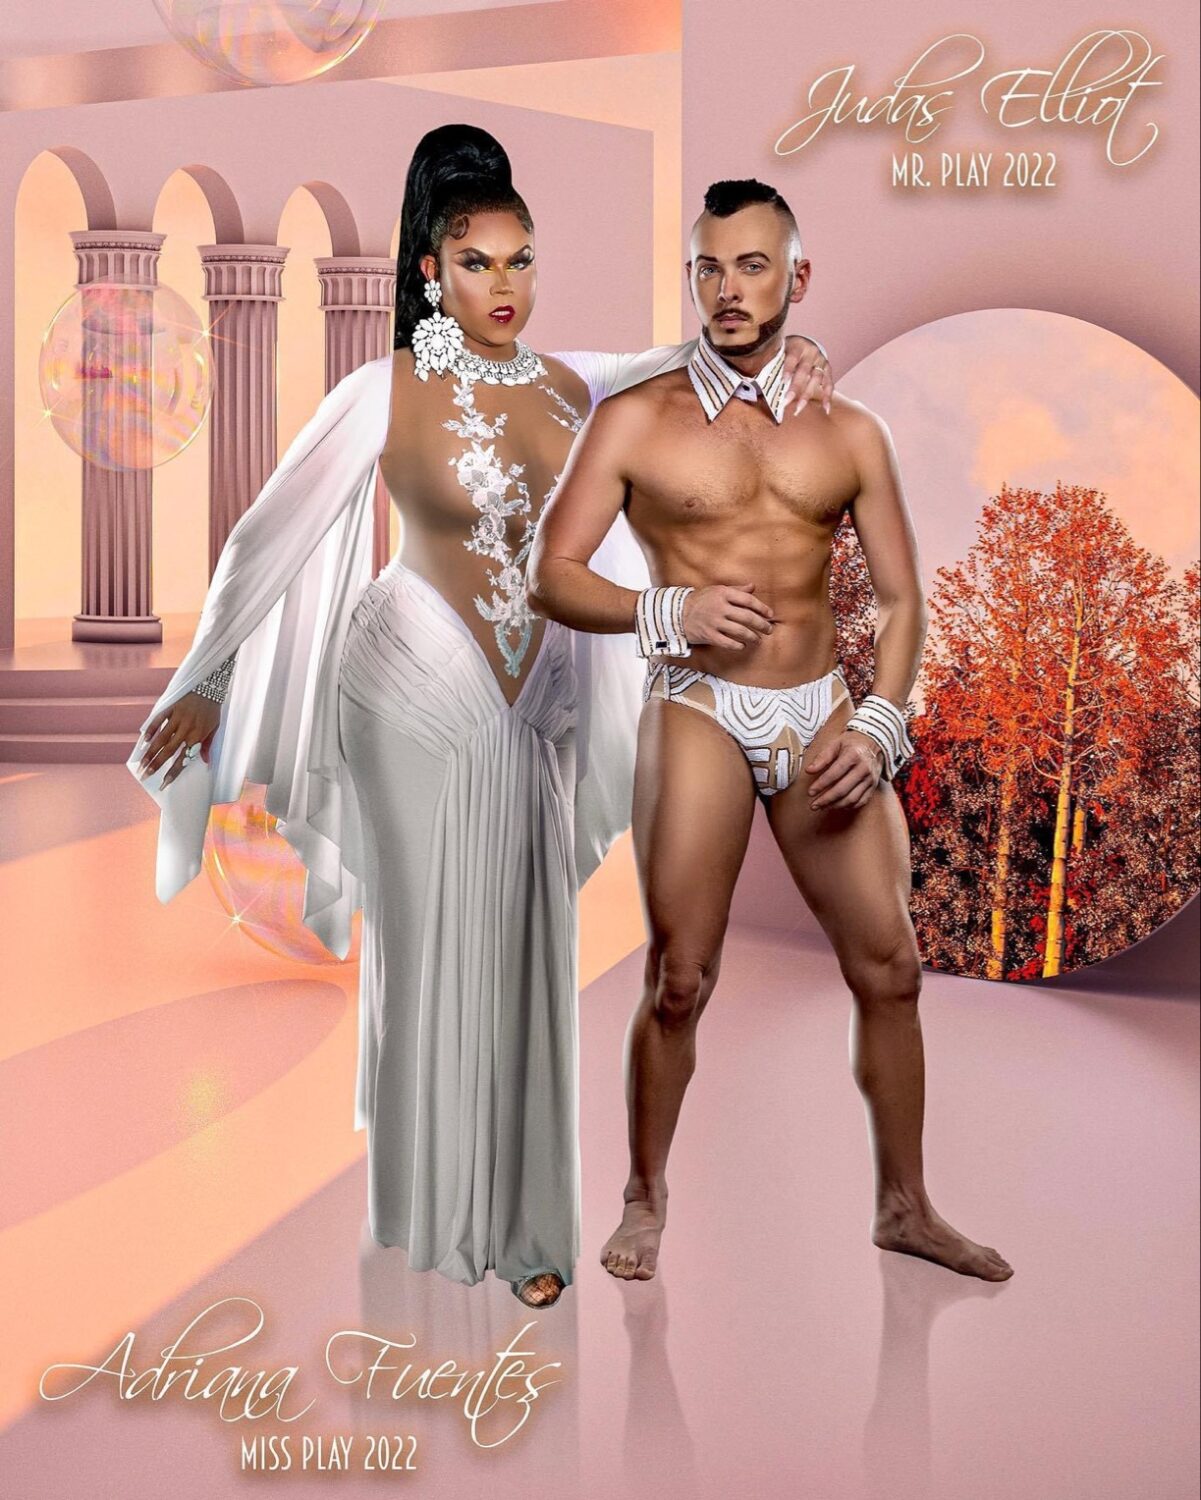 Adriana Fuentes (Miss Play 2022) and Judas Elliot (Mr. Play 2022) | Photo by the Drag Photographer | Photo Edit by Ethan M. Cross Studios